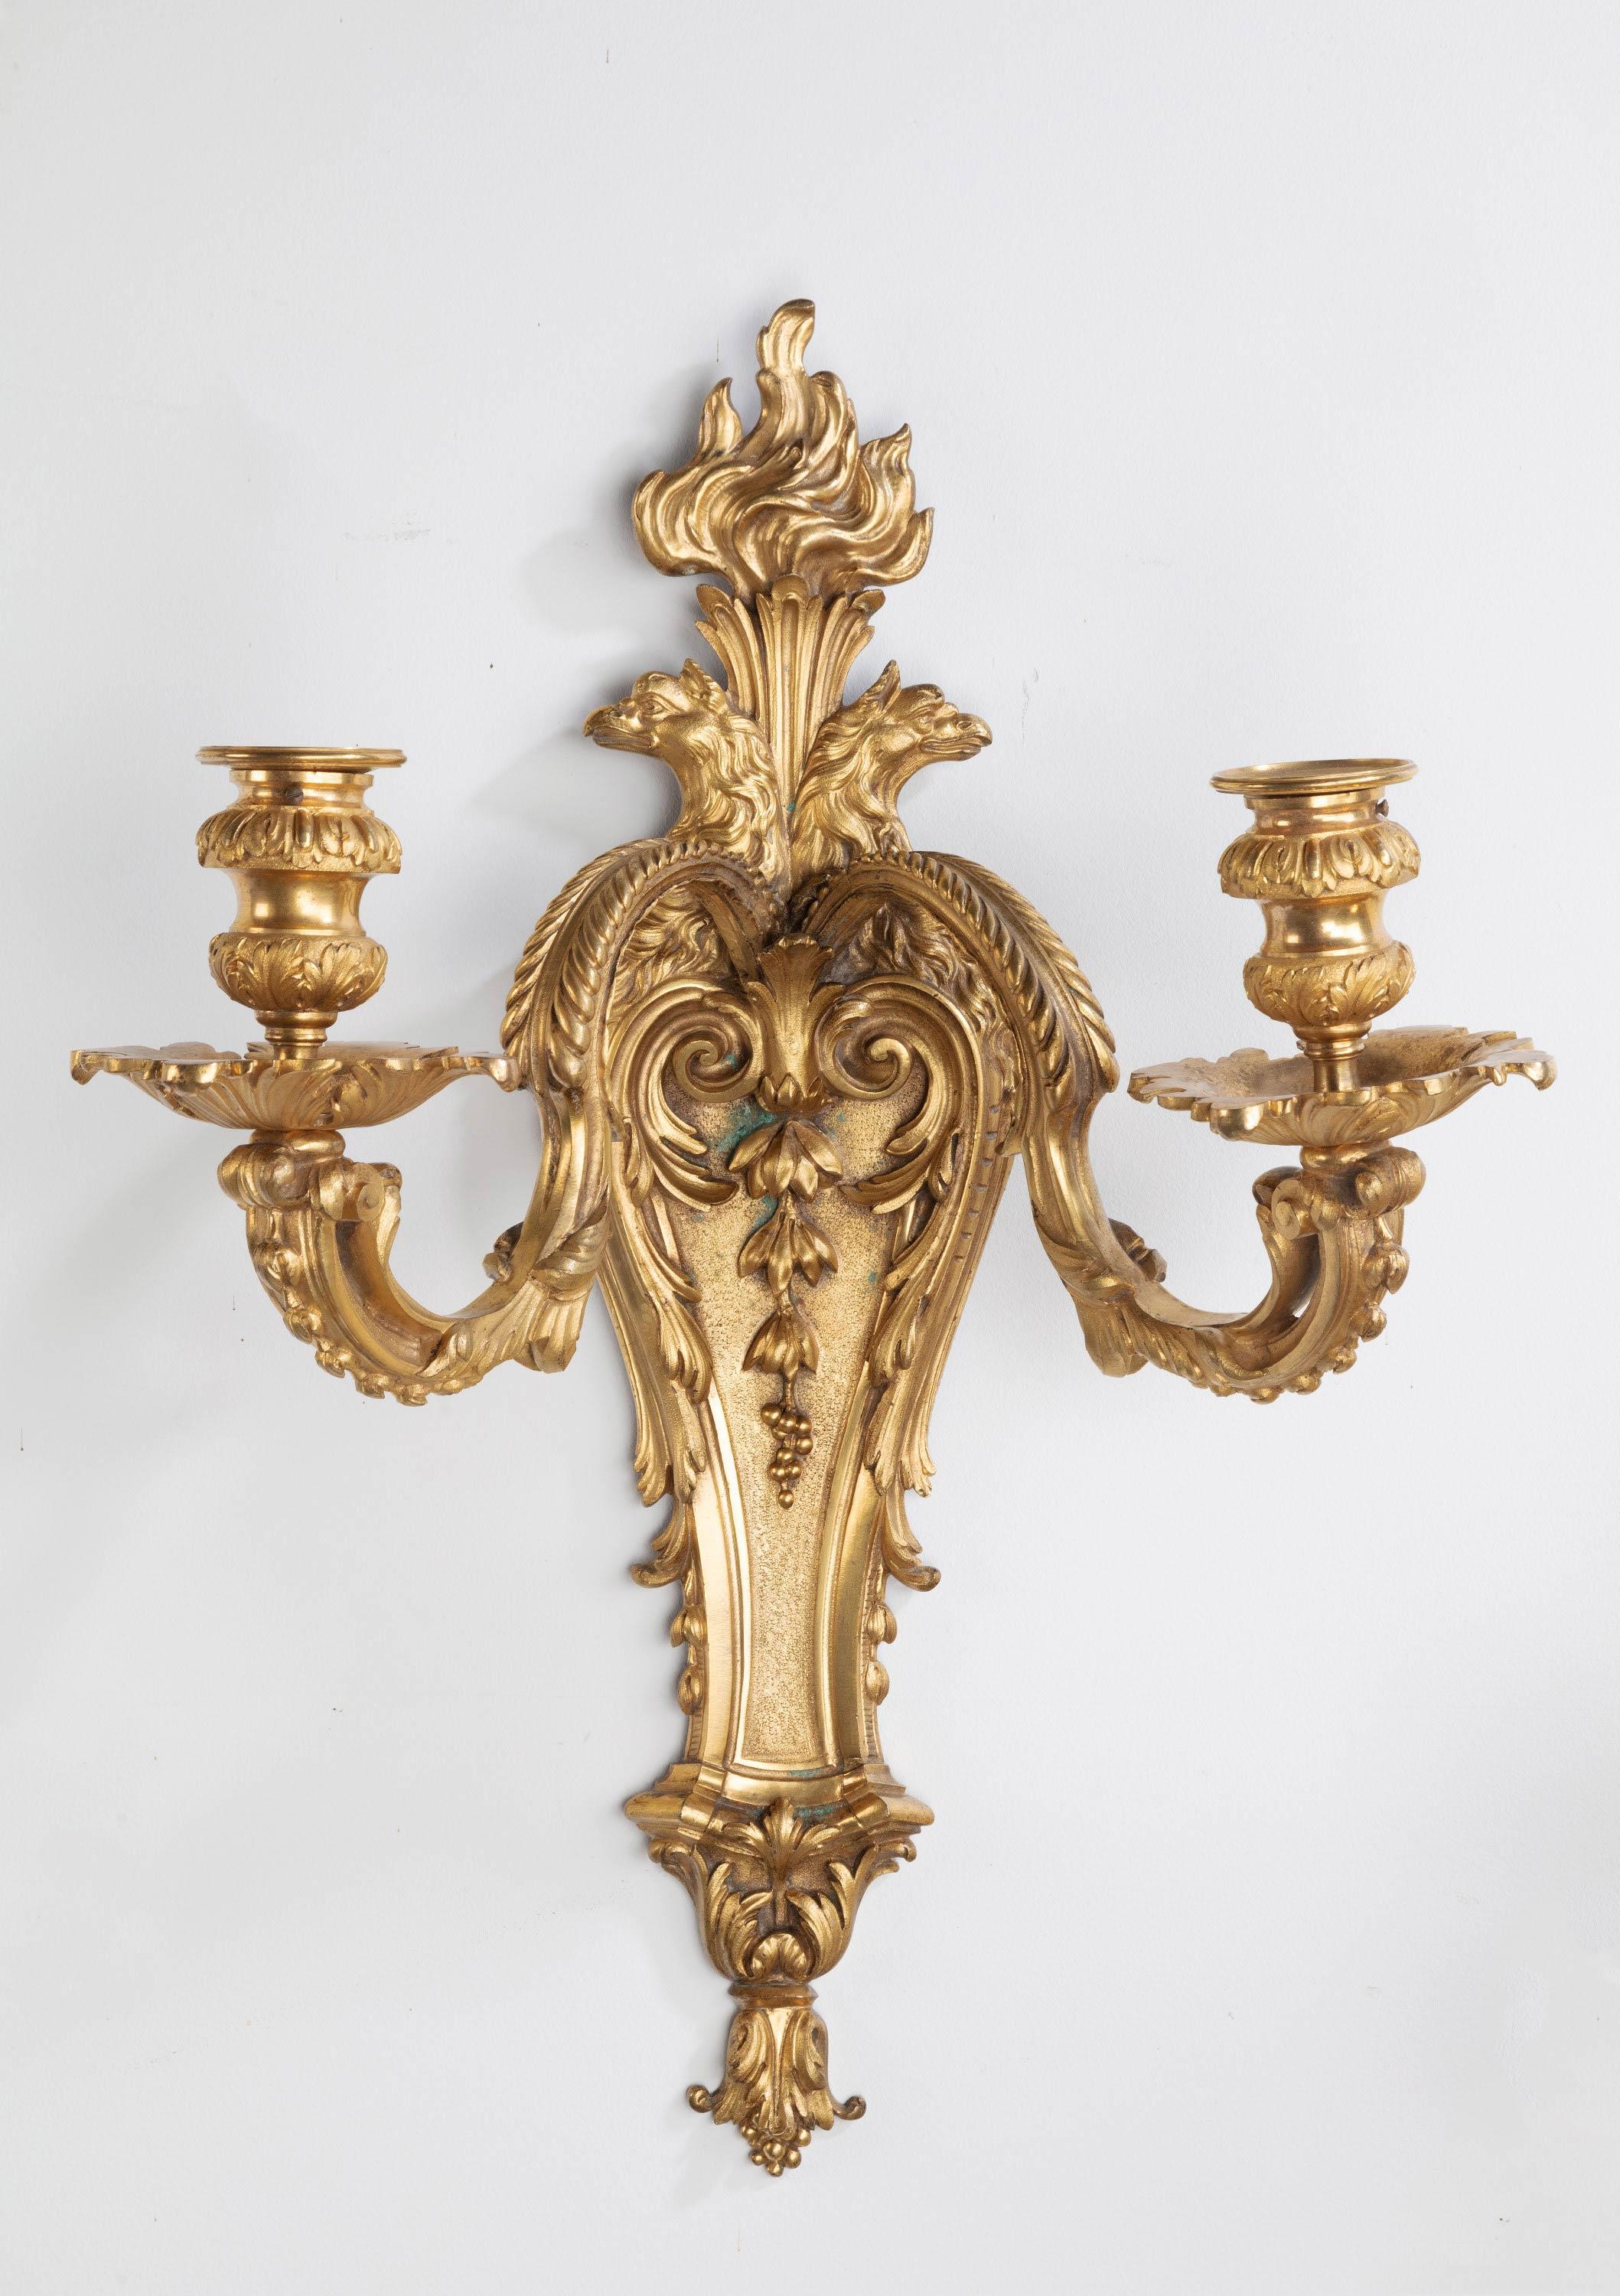 A quite outstanding pair ormolu two-arm wall lights in the baroque manner. The waisted central wall piece and fronds draped in foliage. Two finally carved upper arms. The whole of quite exceptional quality.